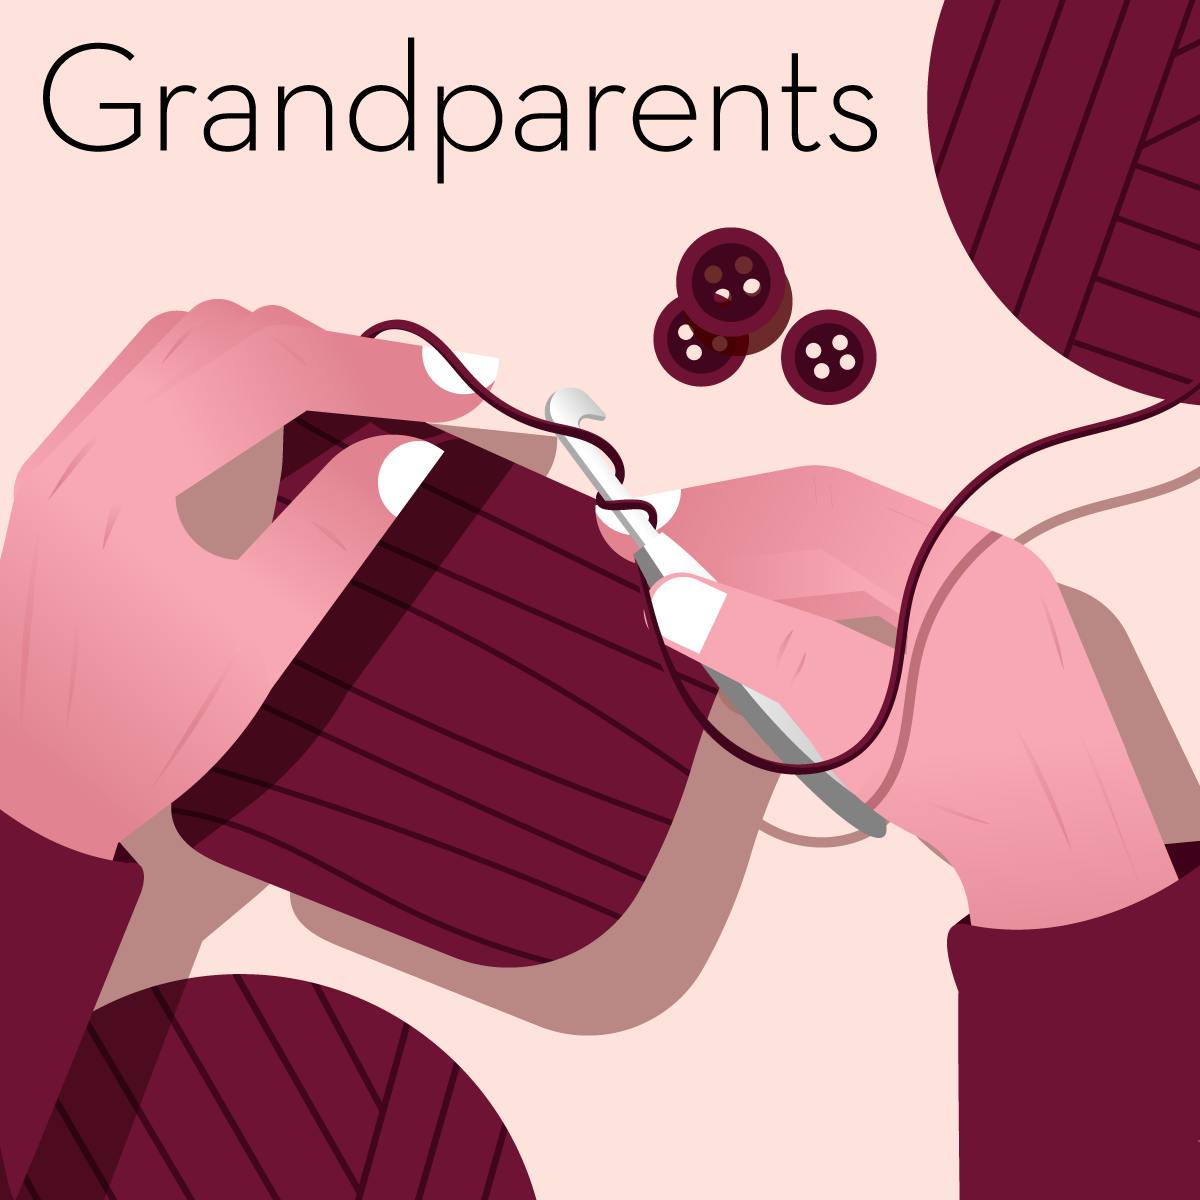 Illustration on a guide showing gifts for grandparents. Two hands are knitting, with buttons on the table.